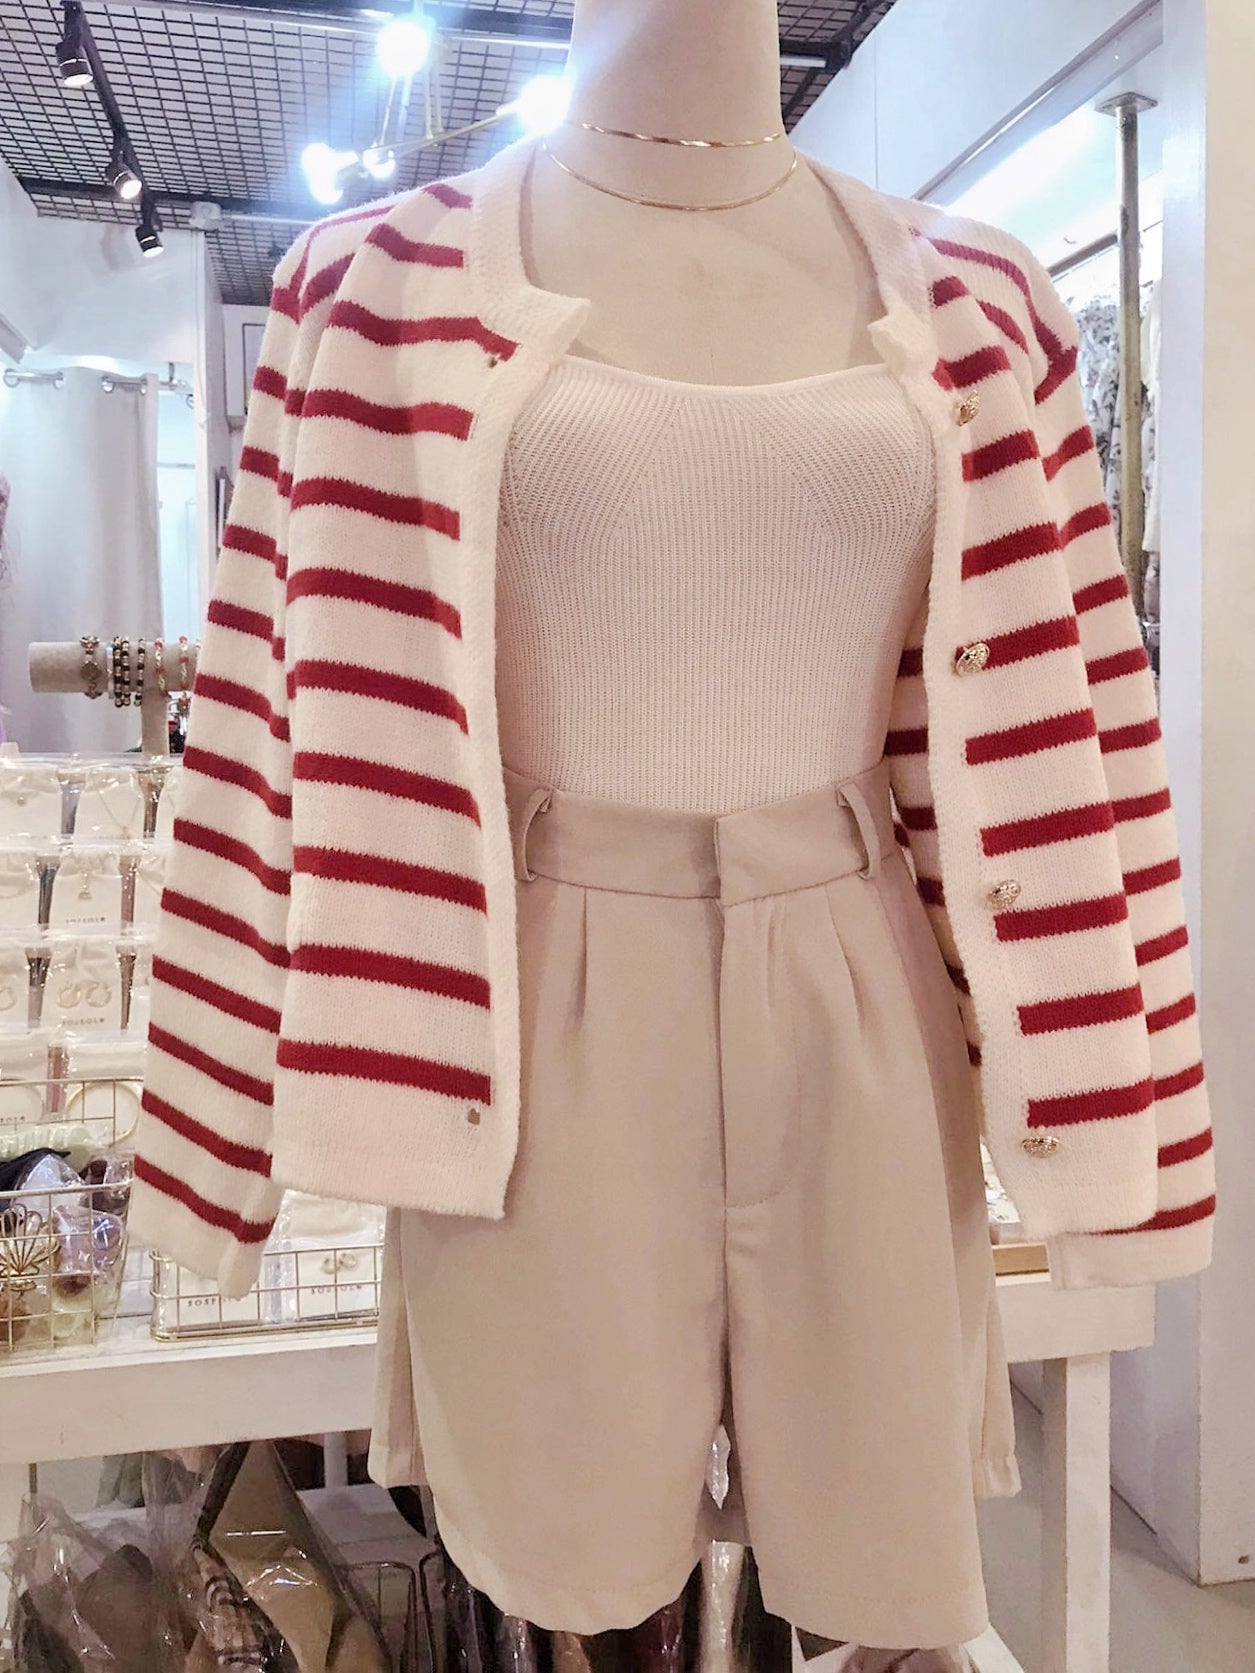 KAIA Premium Knitted Striped Cardigan Top